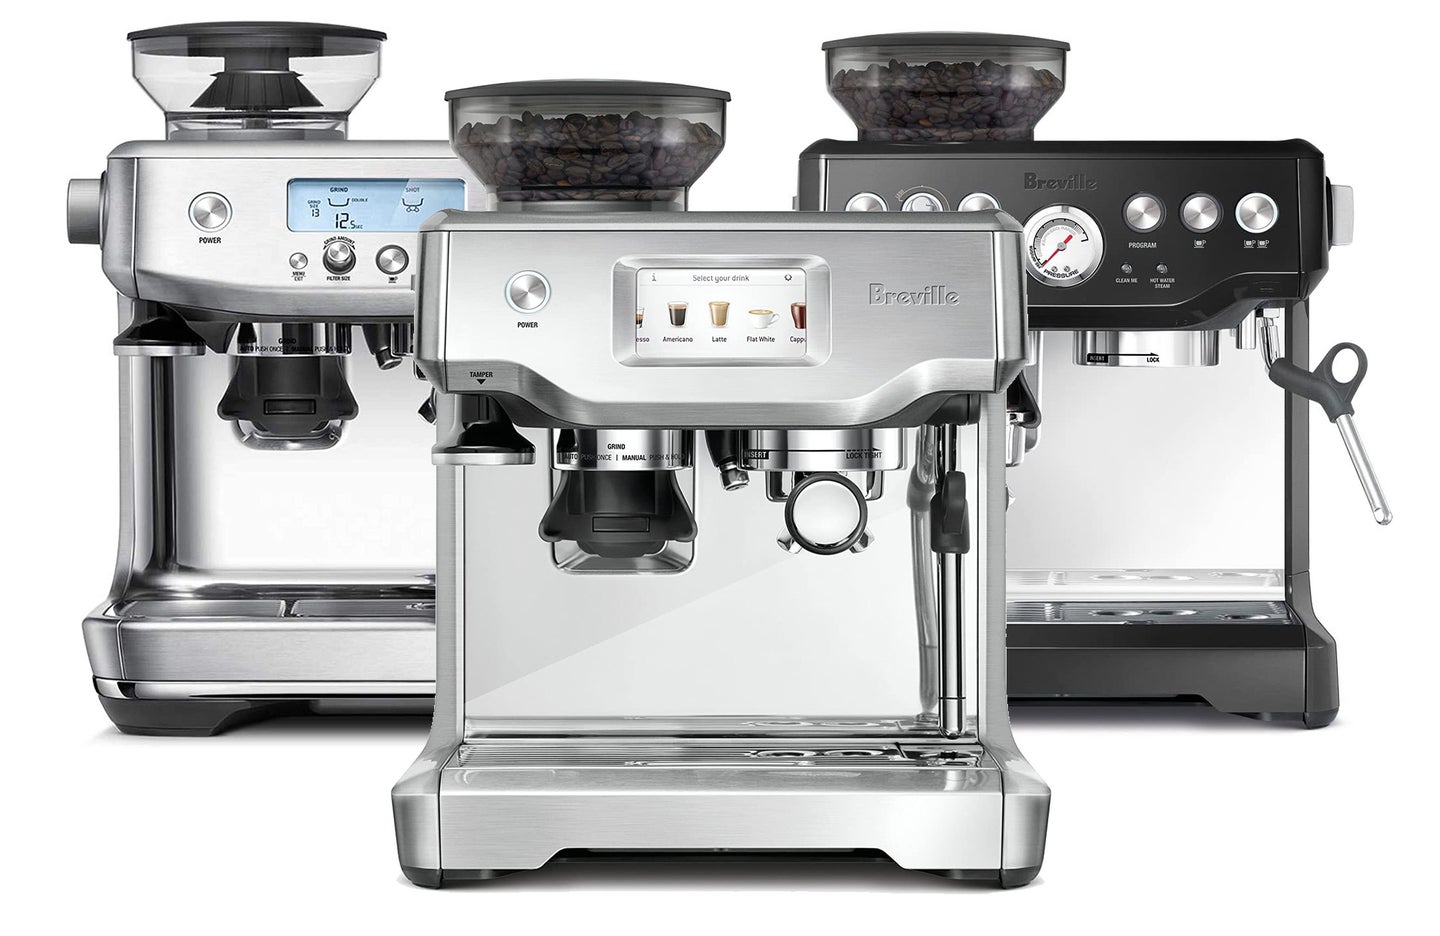 Breville espresso machines on a white background. they're on-sale at Amazon.